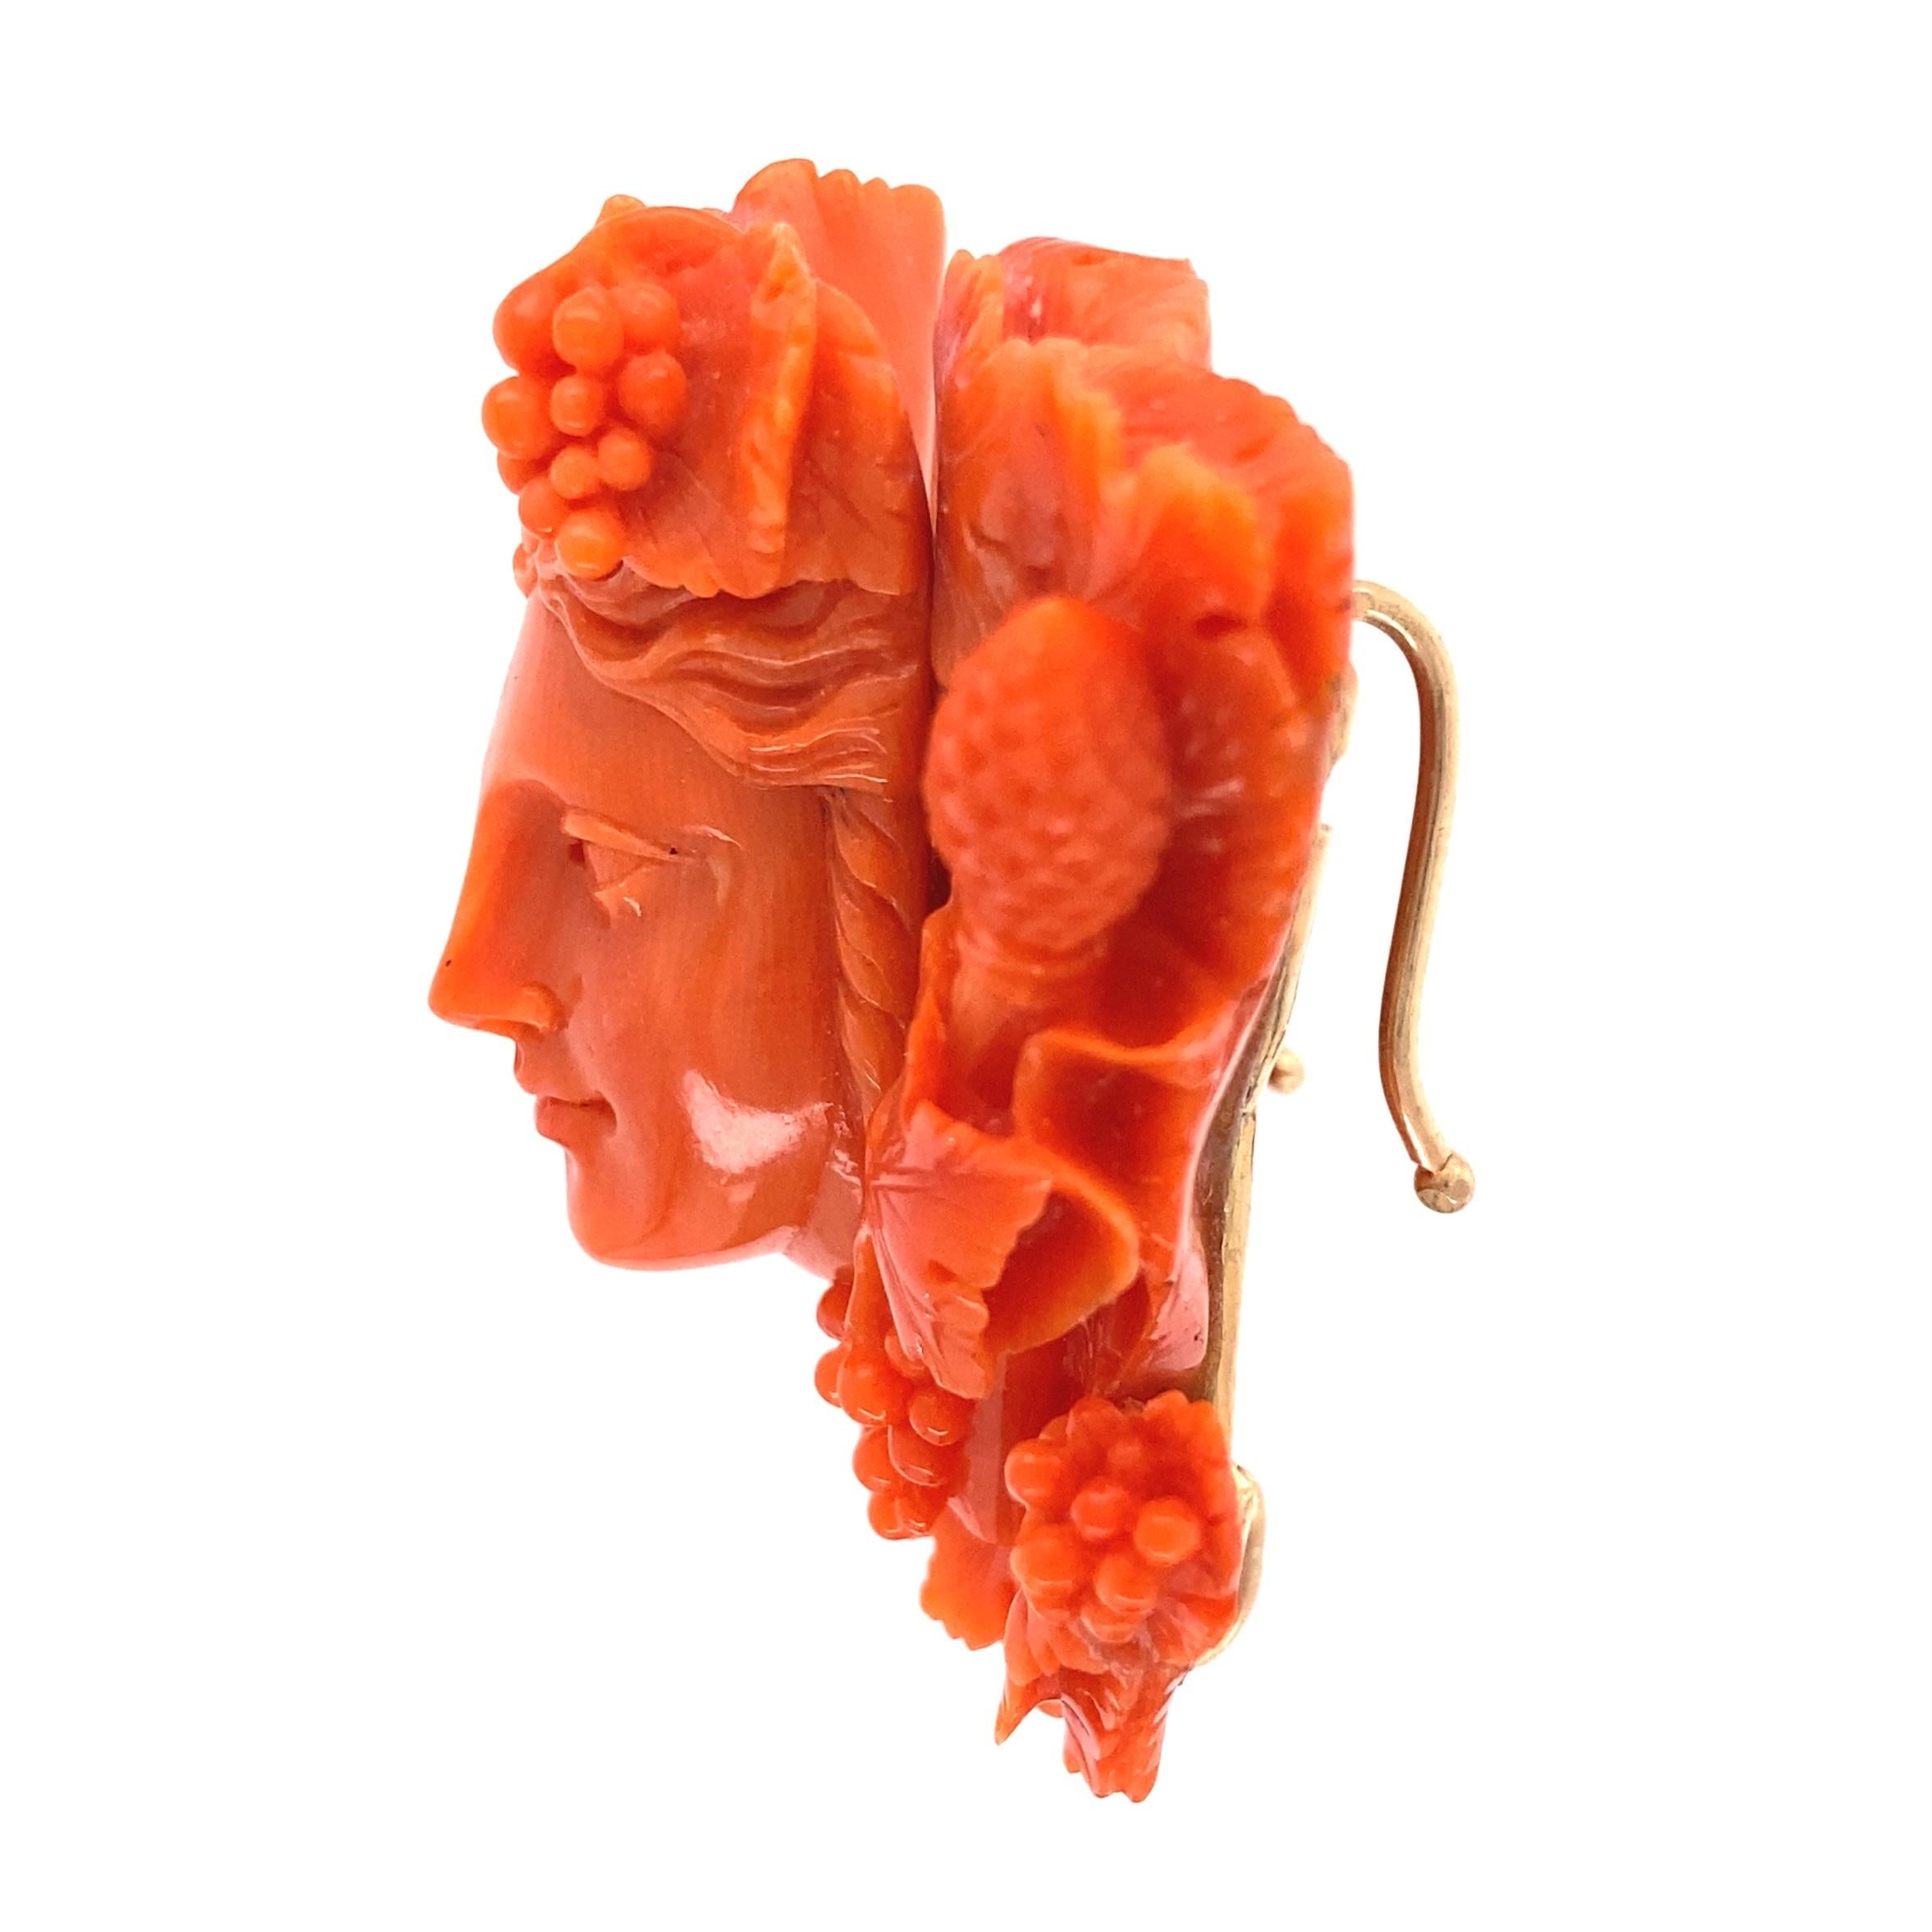 Beautiful and Stylish Antique Victorian Carved Coral and Gold Pendant Enhancer featuring a Noble face with Flowers & Fruit depicting Bacchus. Skillfully Hand crafted. Approx. dimensions: 2”w x 1.75”h x 0.79”d. Classic and Stylish…A Perfect